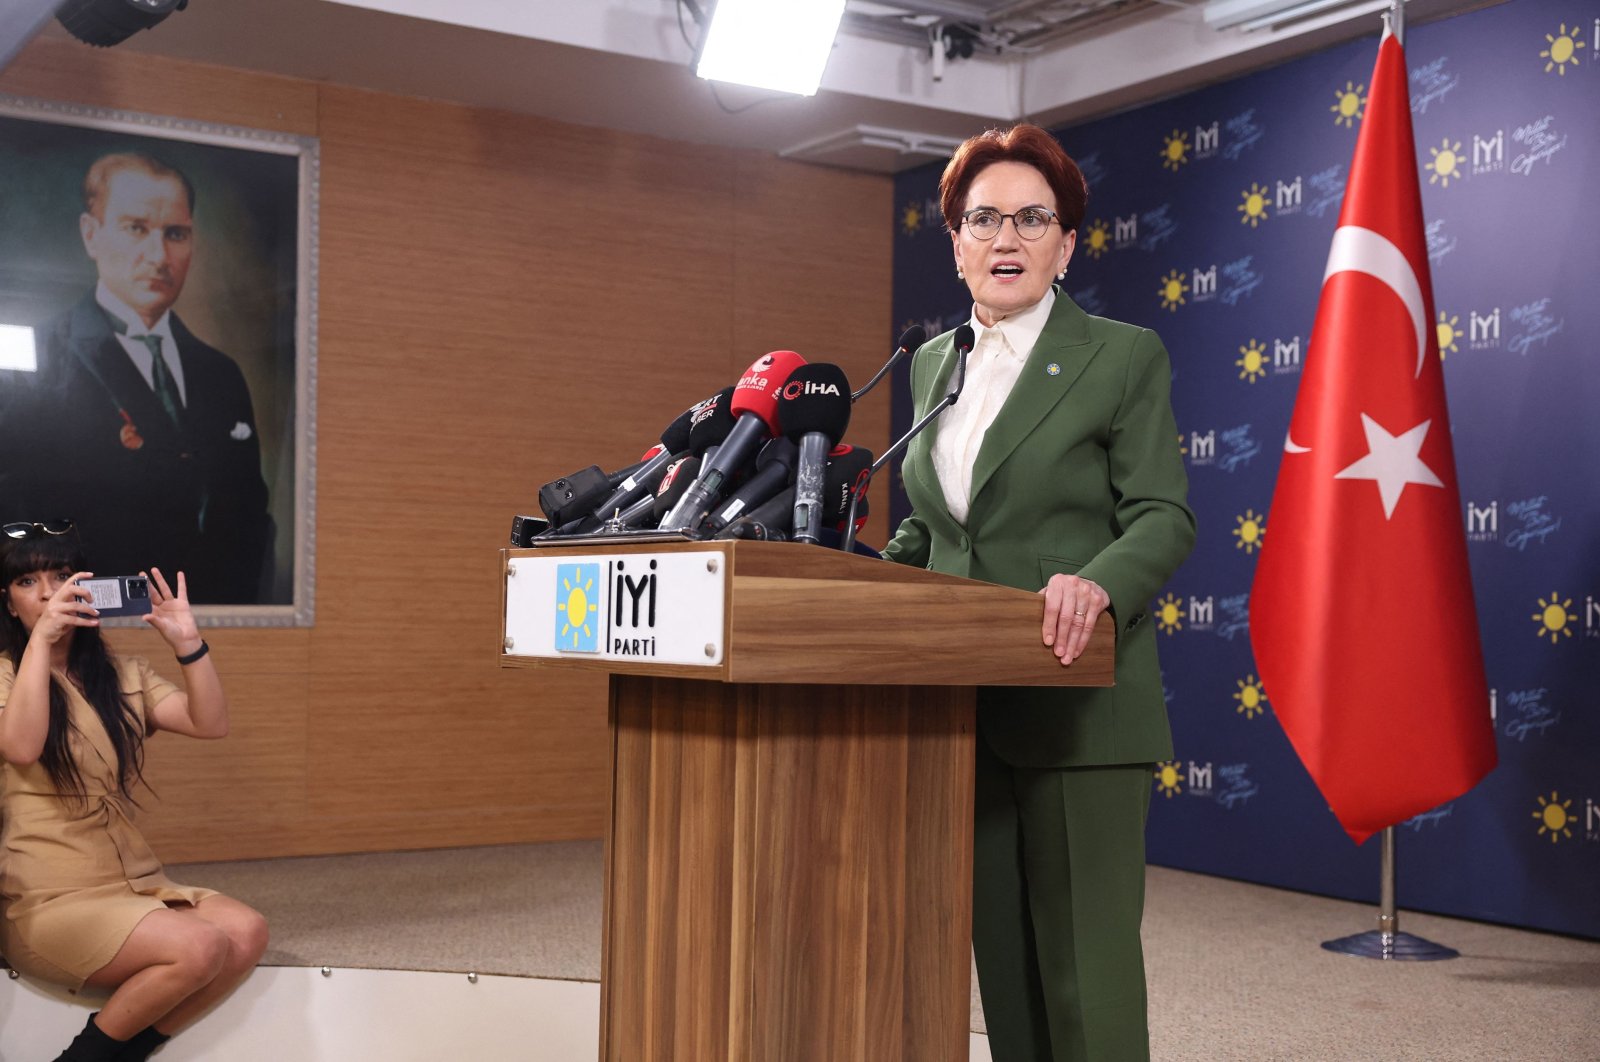 Meral Akşener, leader of the Good Party (IP), makes a statement at the party headquarters in Ankara, Türkiye, March 3, 2023. (AFP Photo)